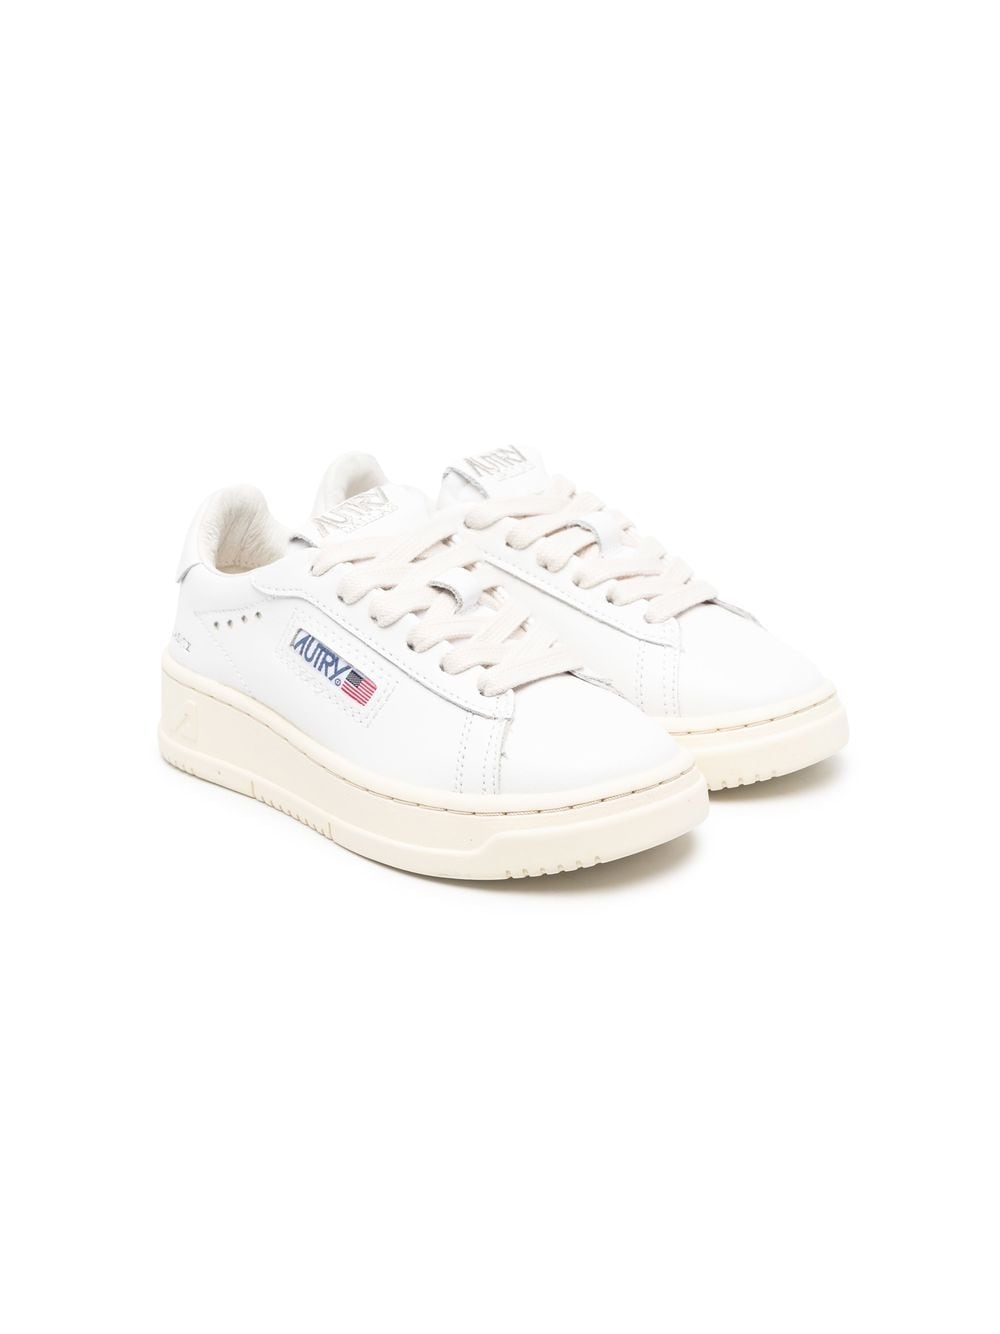 Autry Kids low-top leather sneakers - White von Autry Kids